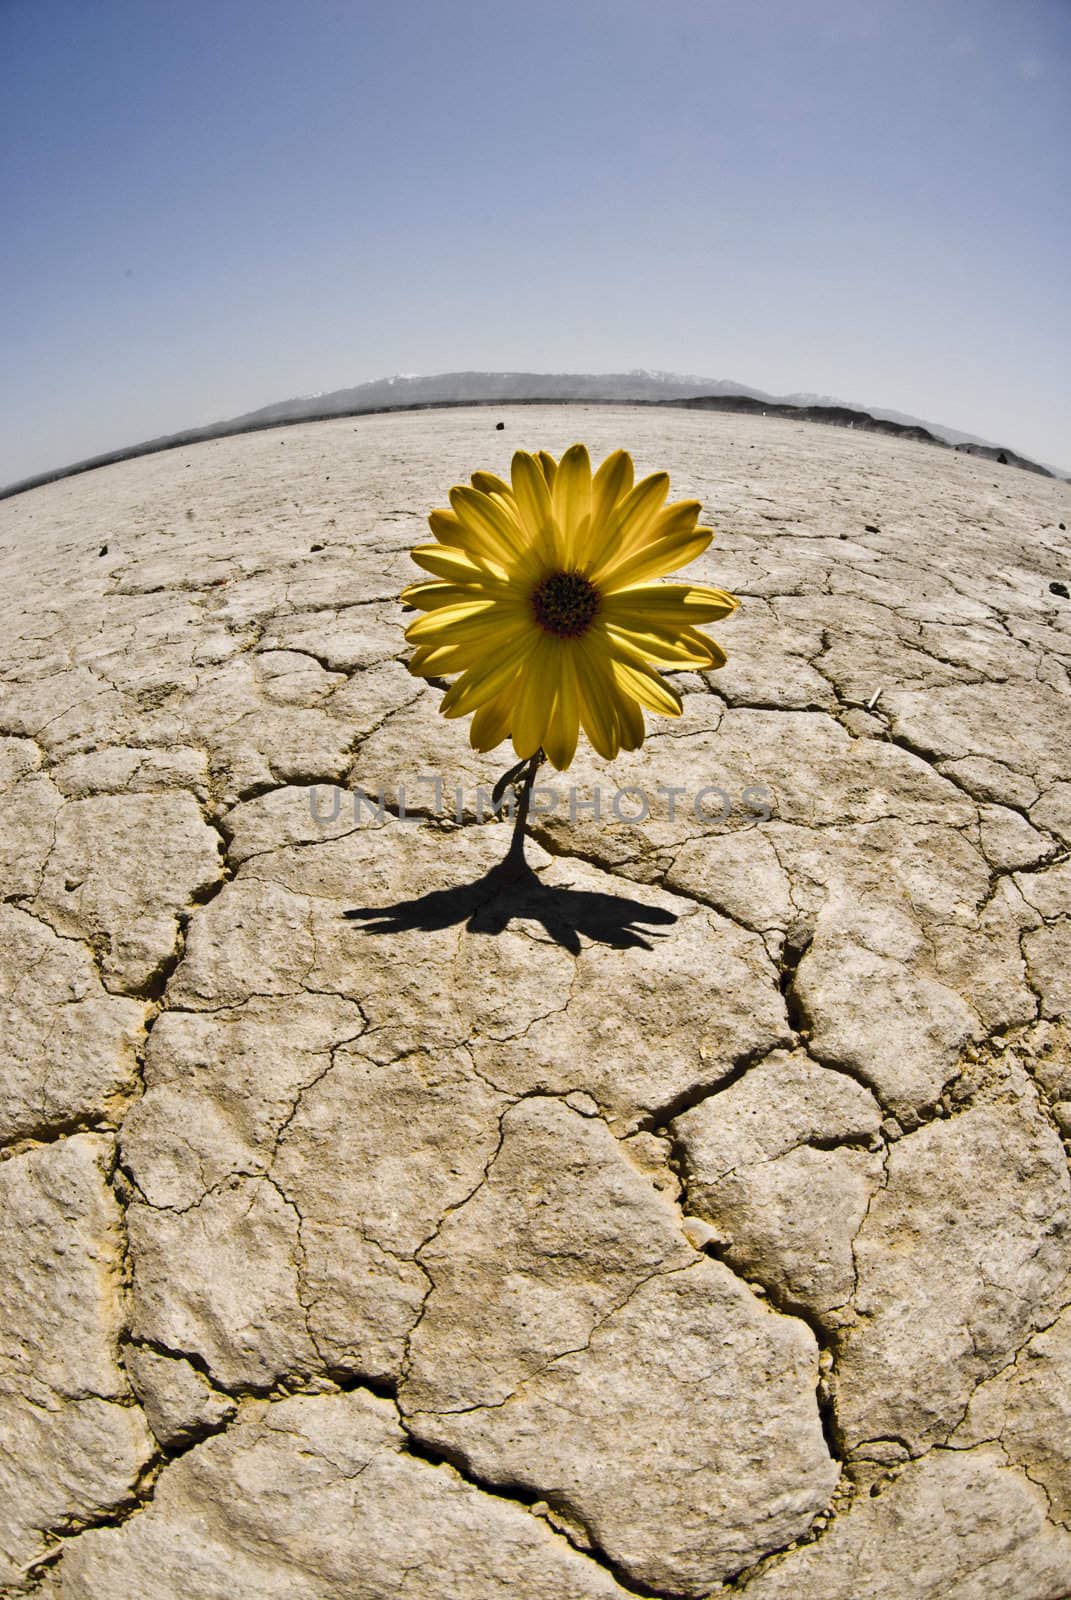 Flower grows in a dried lake bed